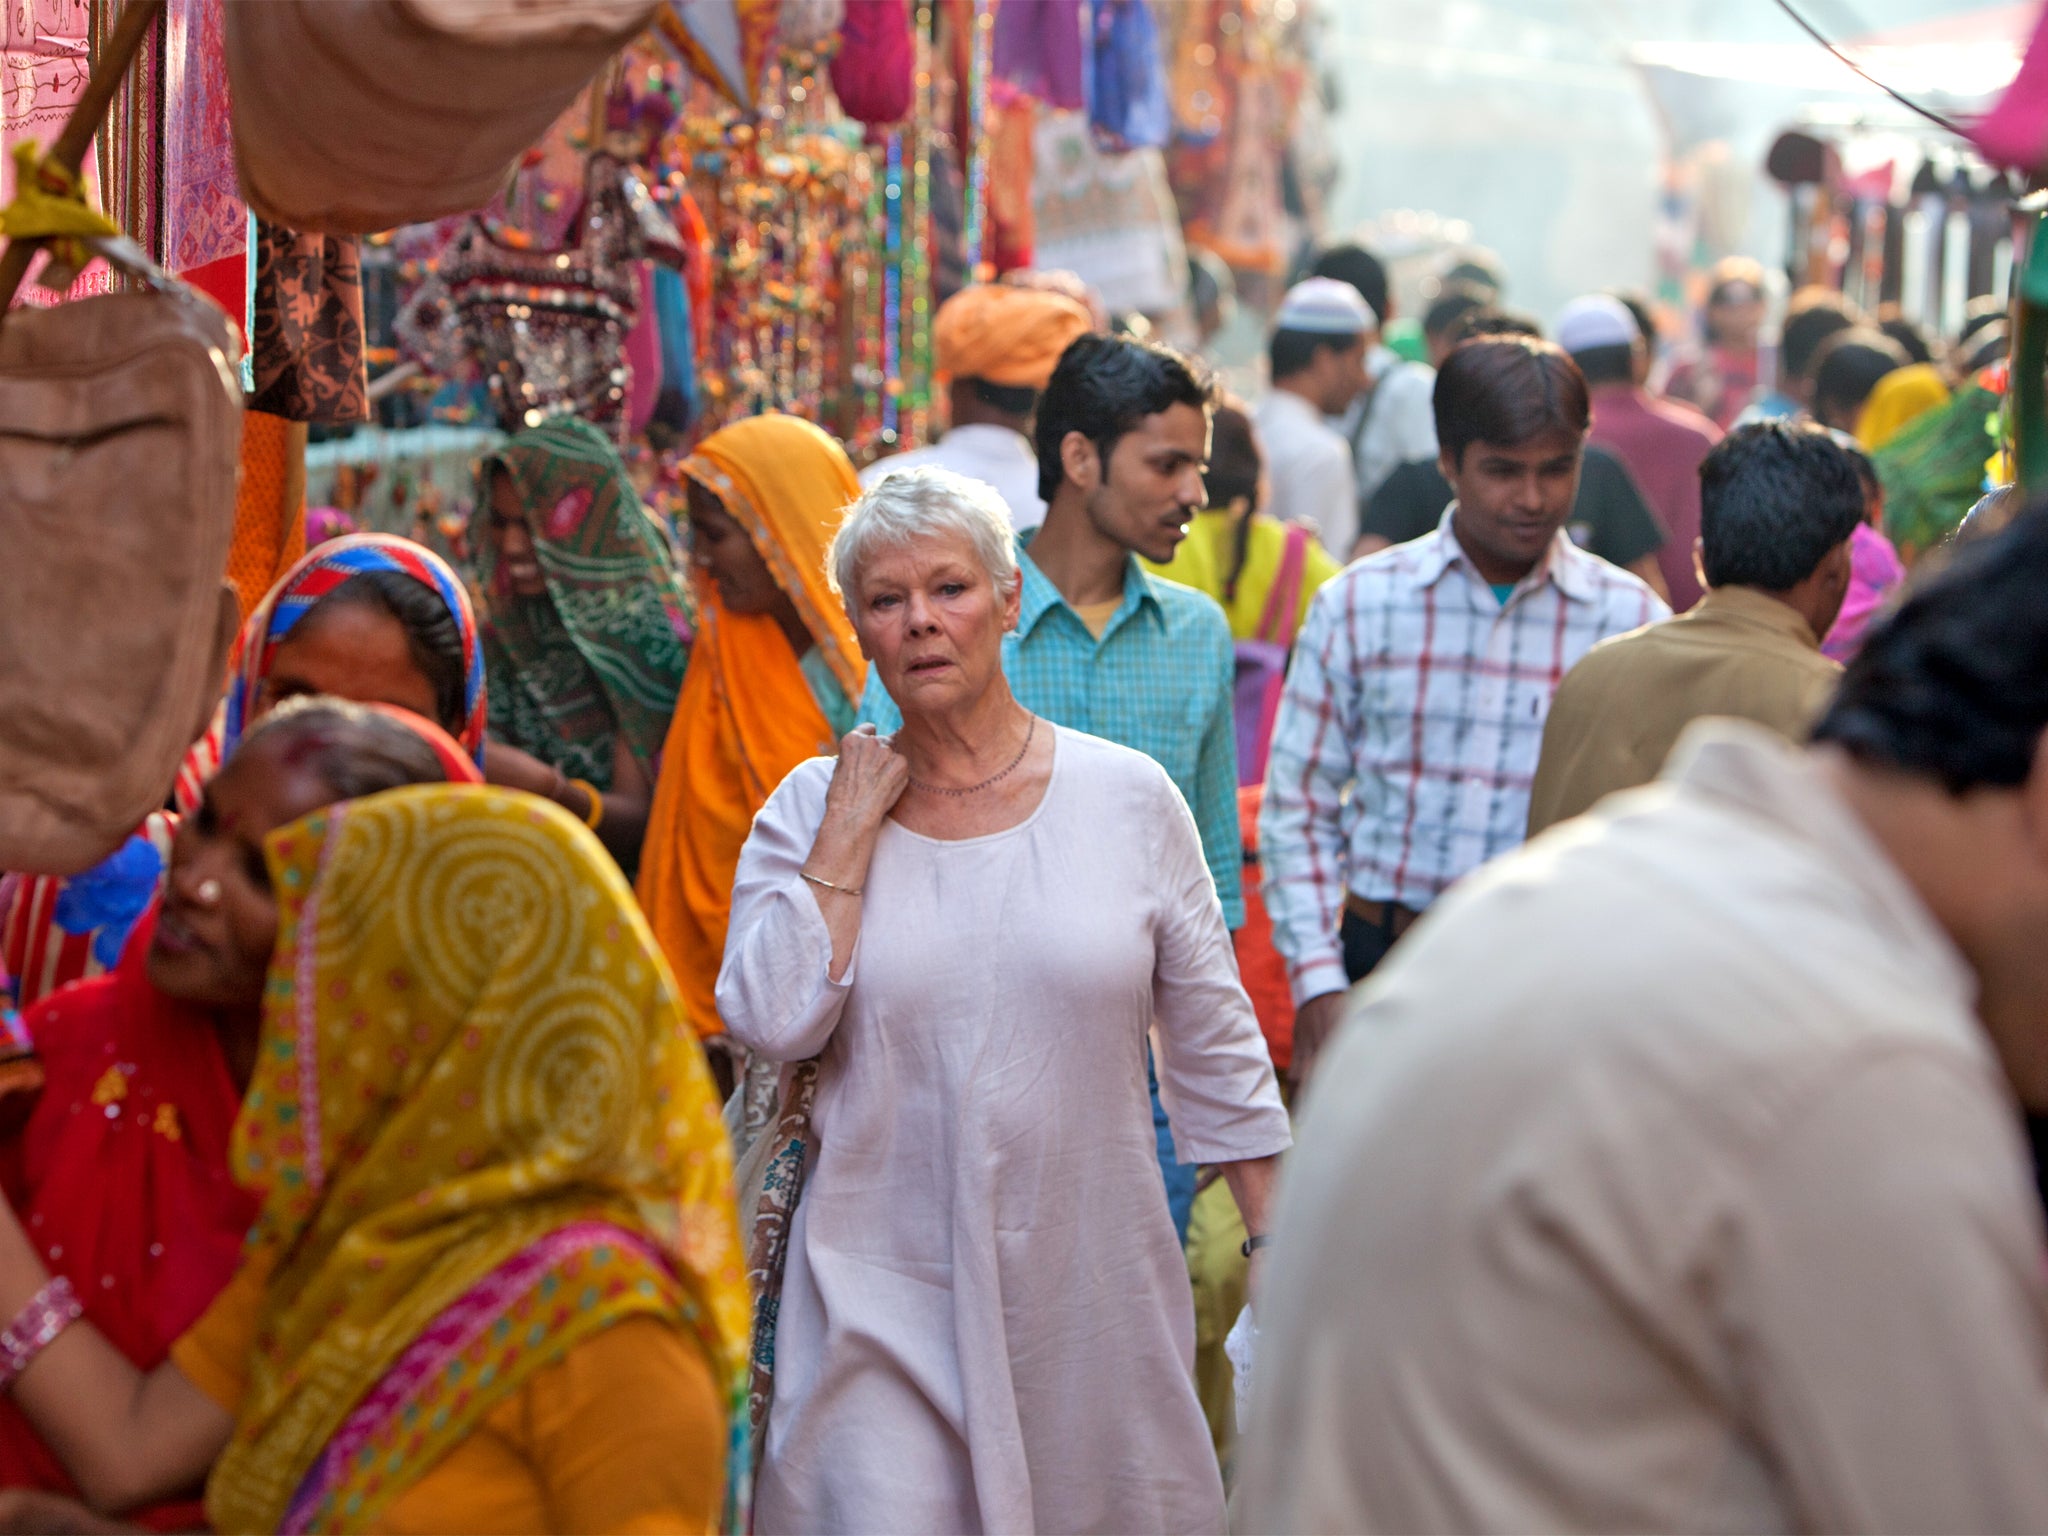 Old favourite: Judi Dench in 'The Best Exotic Marigold Hotel'